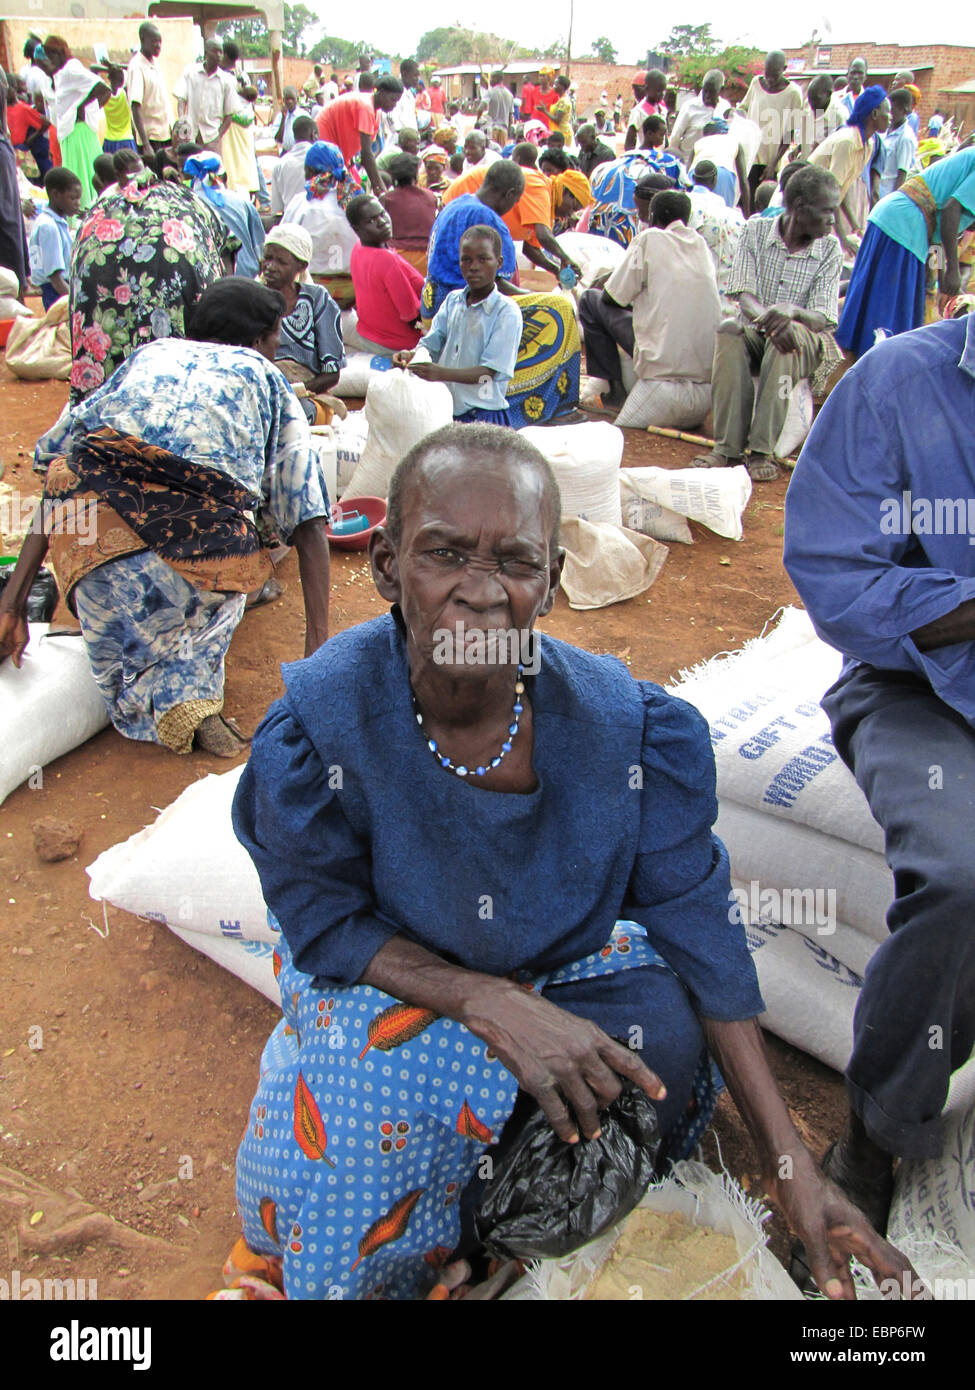 refugee camp for internally displaced people in northern Uganda around Gulu, the non-governmental organisation 'Norwegian Refugee Council' is distributing food rations for the UN World Food Programme for elderly and hancicapped people, bags with mais lyin, Uganda, Gulu, Gulu Stock Photo